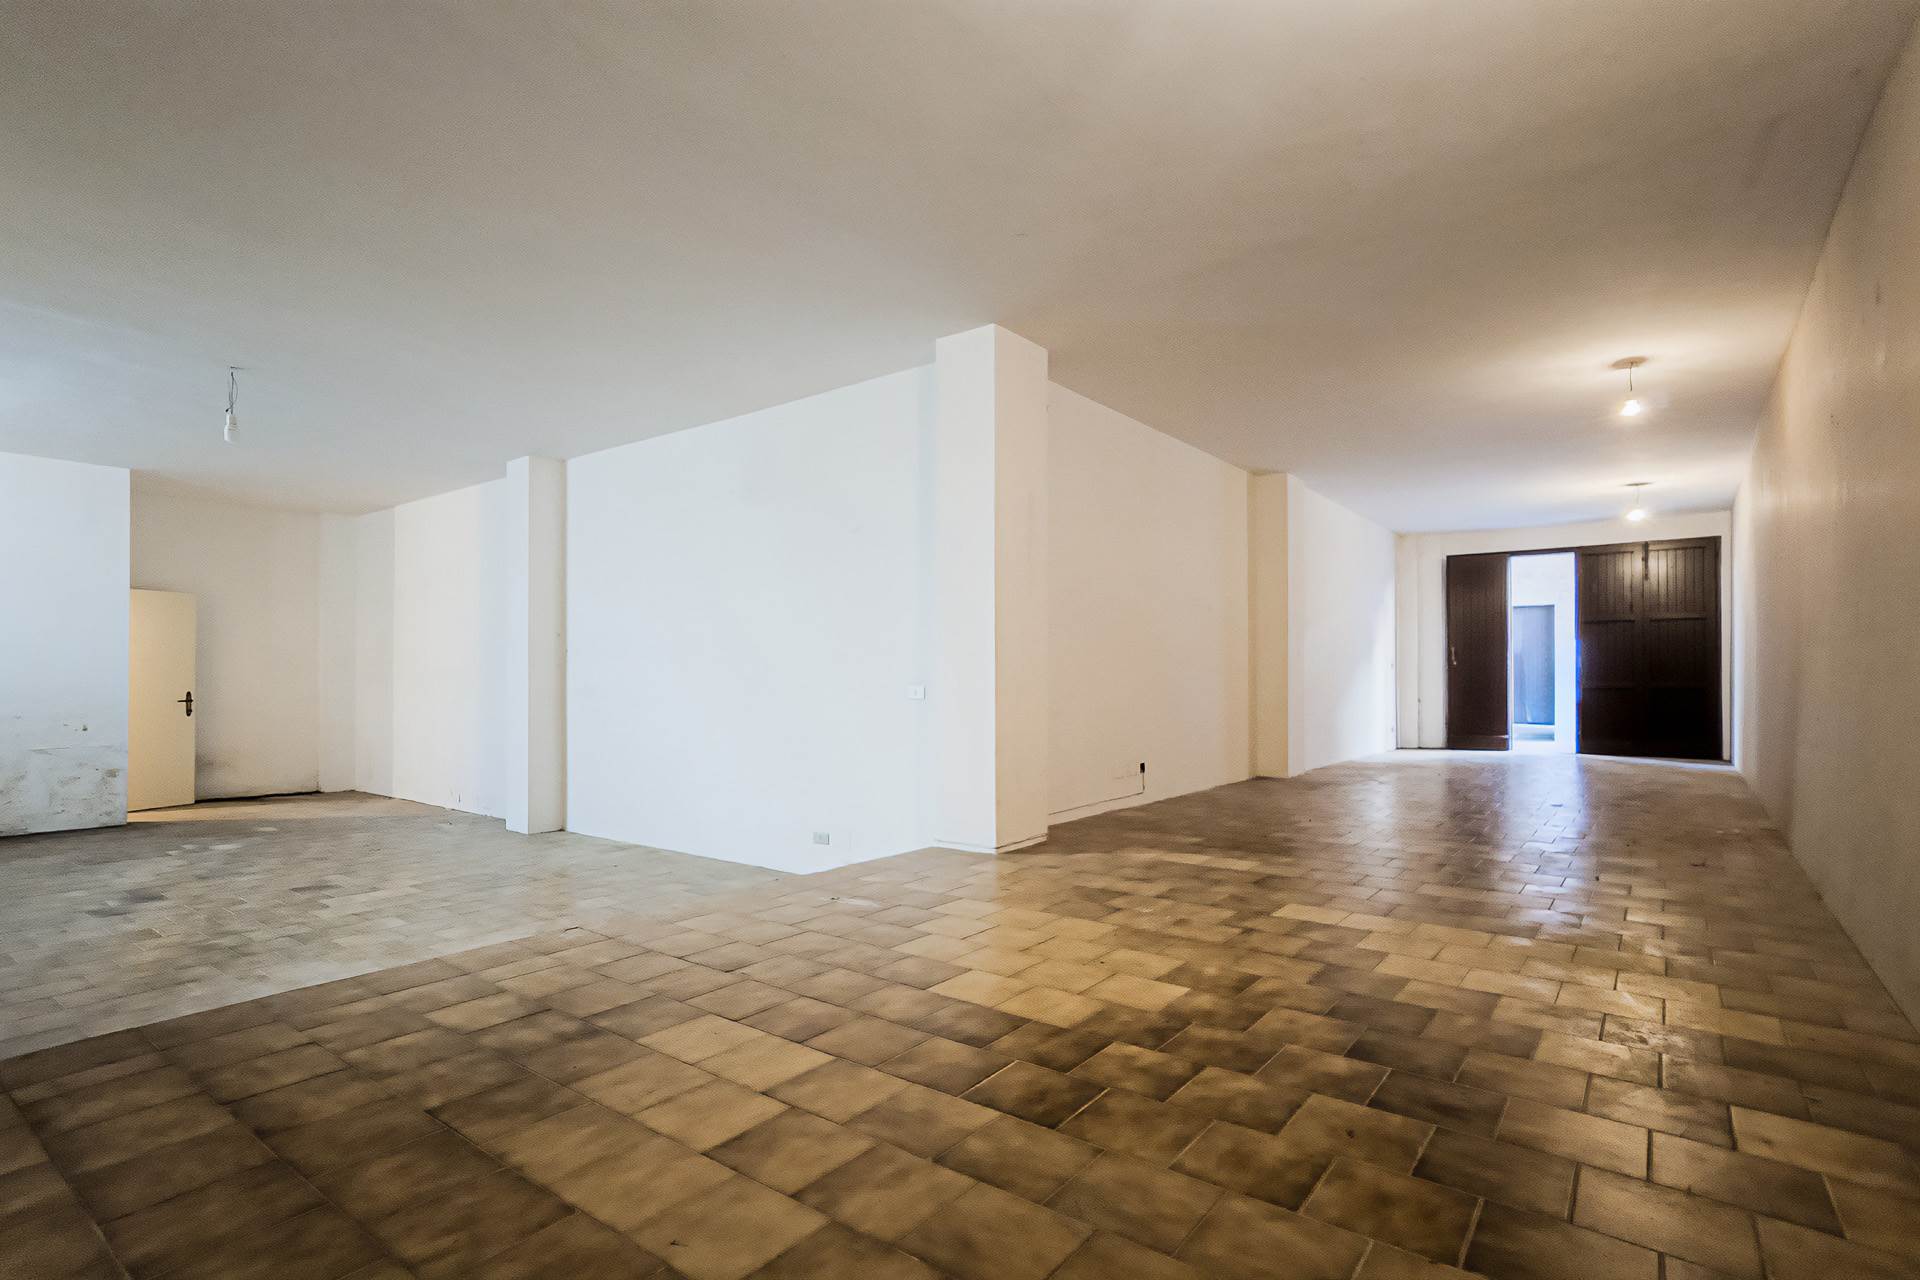 CAPPUCCINI, SIENA, Garage / Parking space for sale of 116 Sq. mt., Habitable, Energetic class: Not subject, placed at Ground on 2, composed by: 1 Room, 1 Bathroom, Double Box, Price: € 102,000